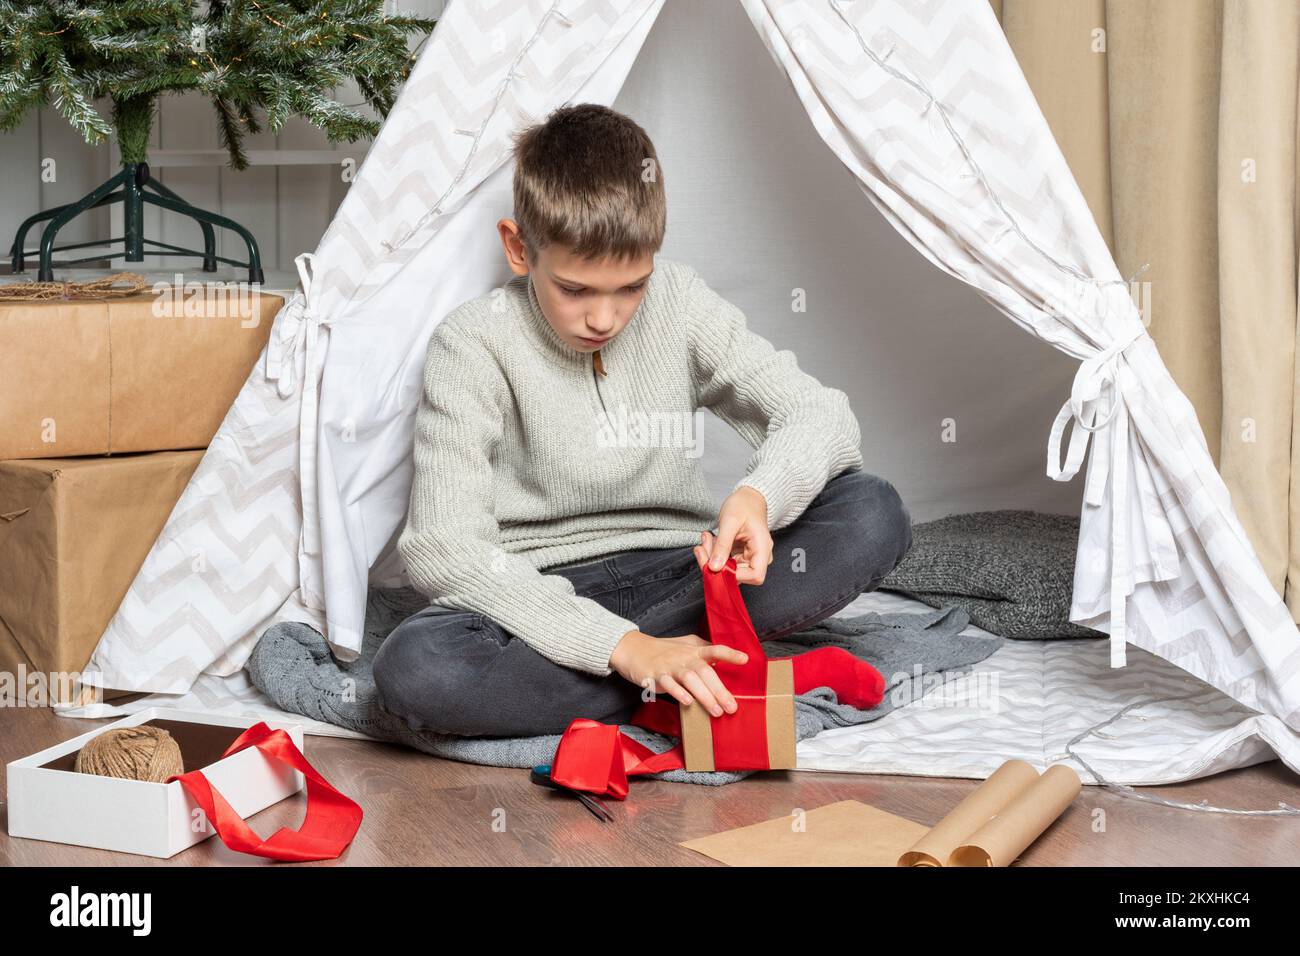 Gift wrapping. A teen child wraps Christmas gifts surprises in kraft paper with a rope, red ribbons. A serious boy is packing gifts for the family. Fa Stock Photo